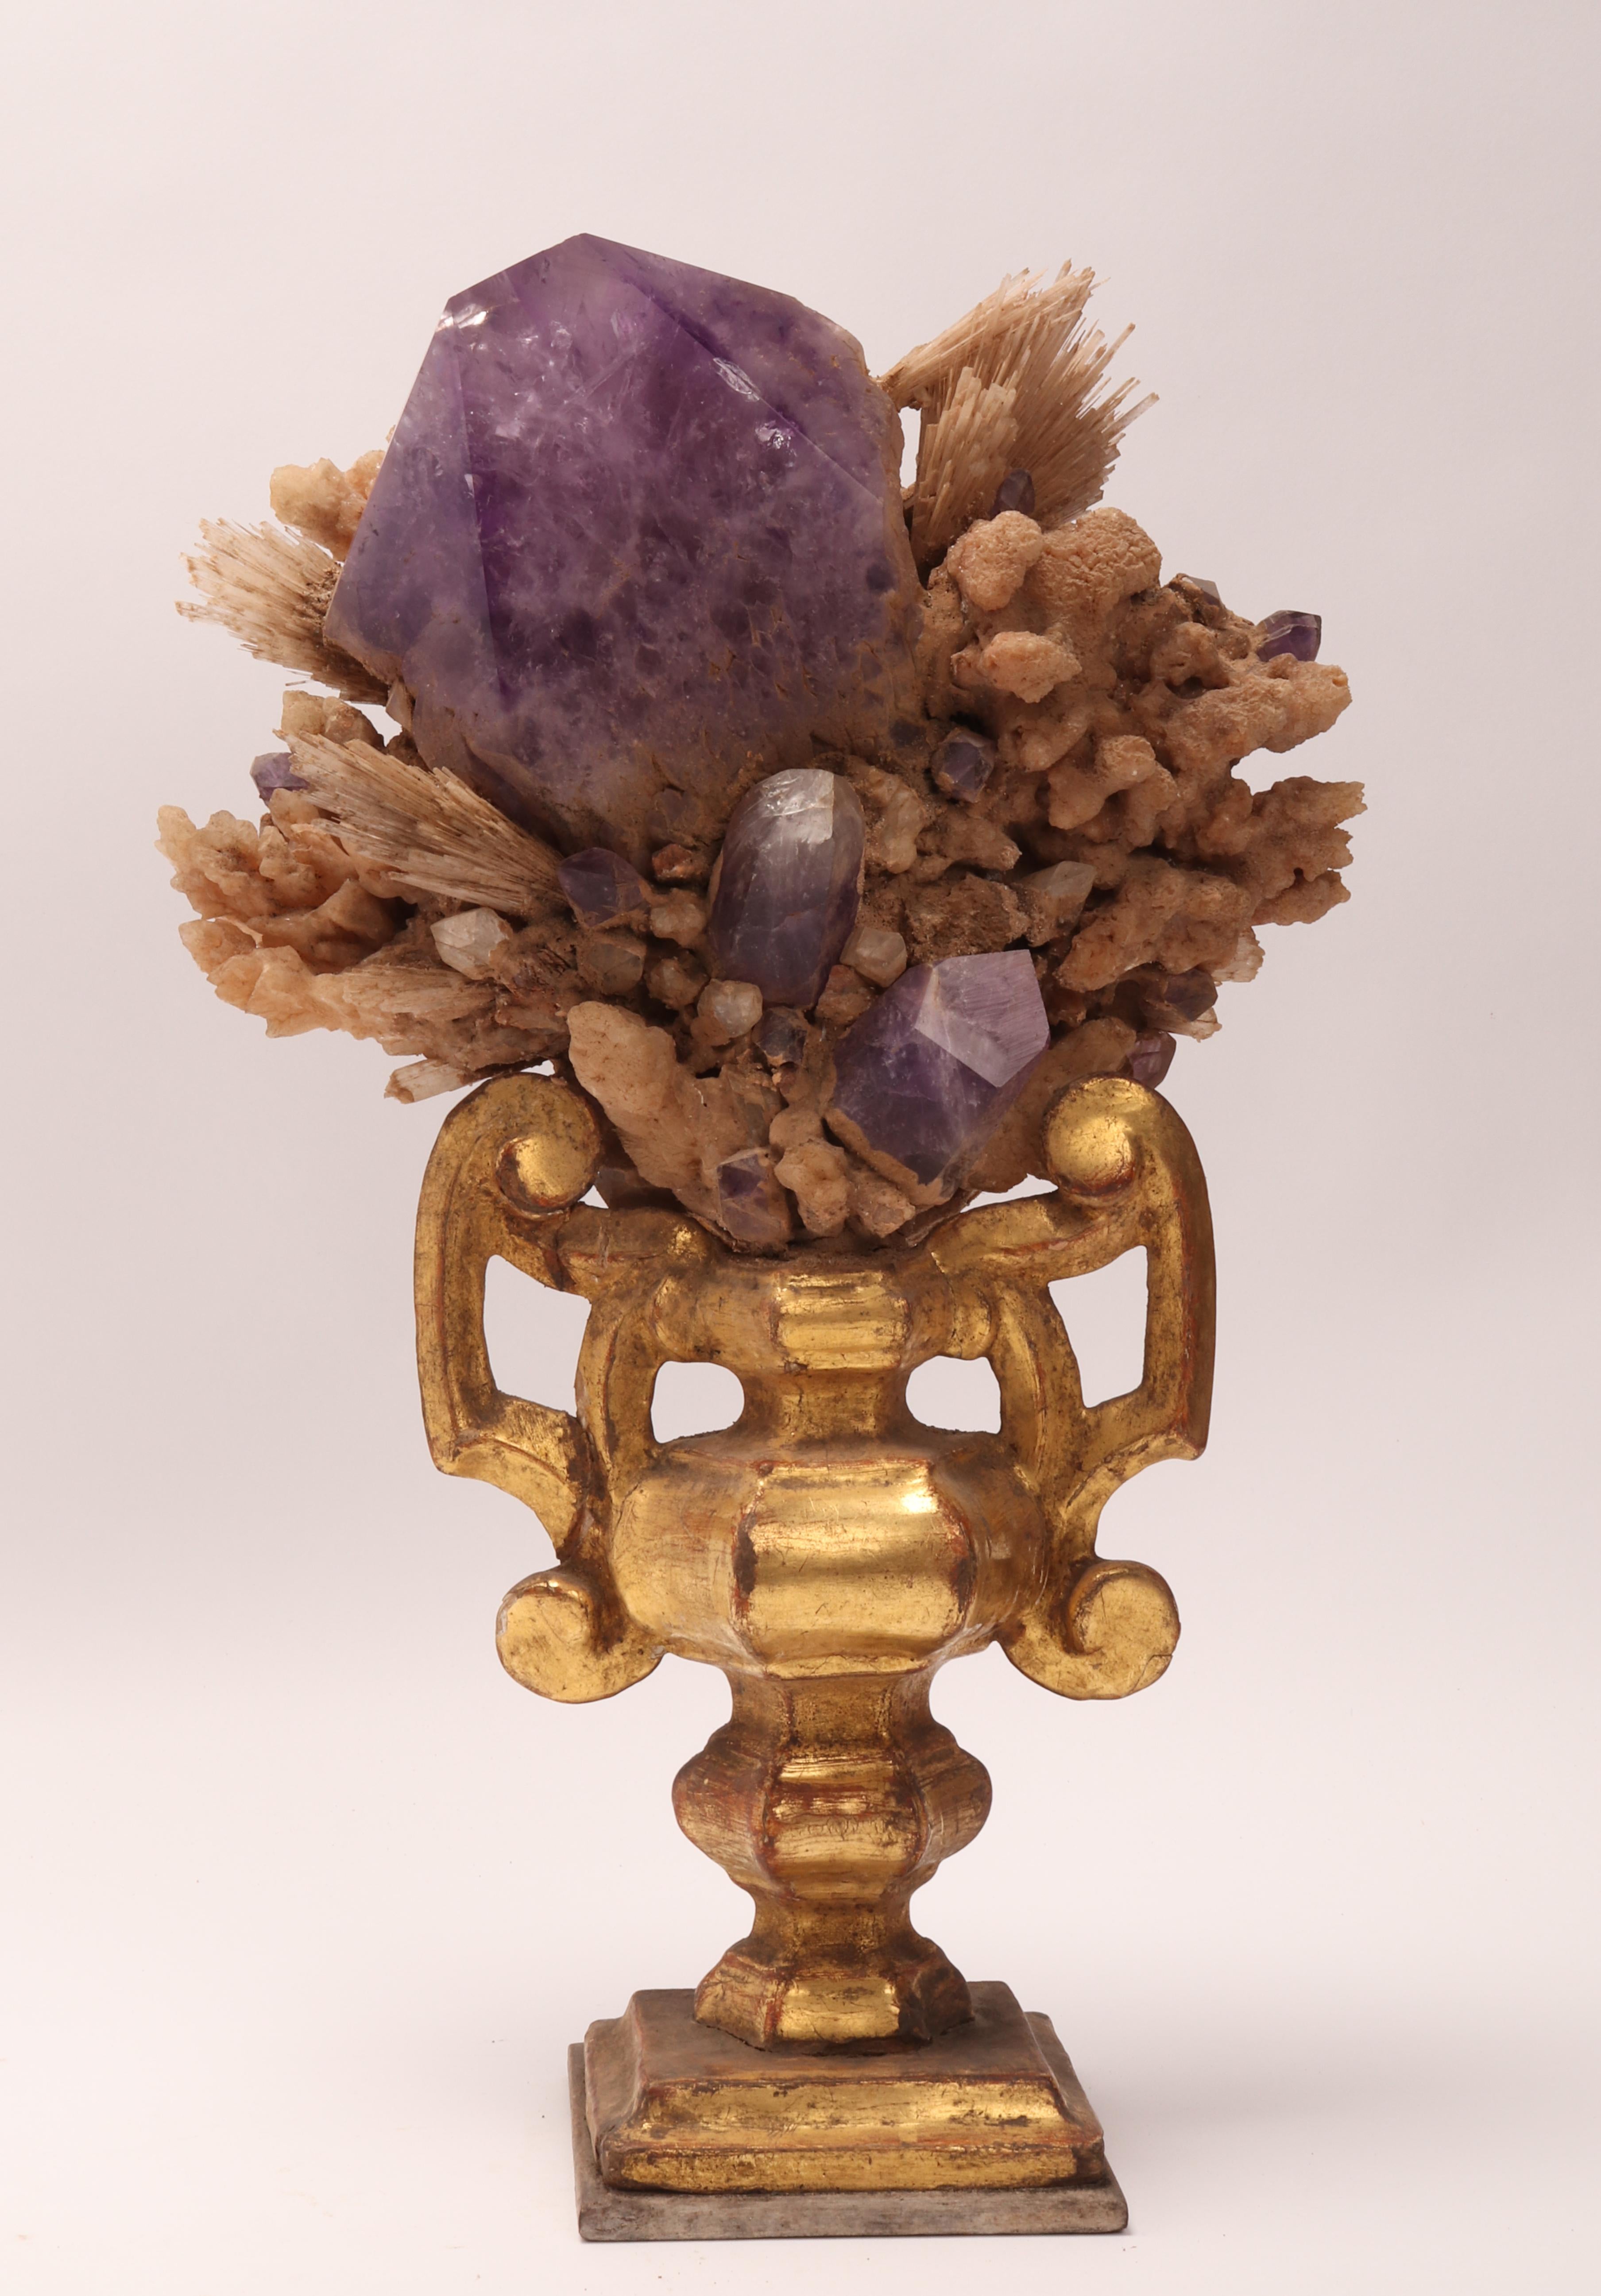 A Naturalia mineral specimen. A druze of Amethyst, colacite stones and calcite flowers crystals, mounted over a guild-plated wooden base on a vase shape. Italy 1880 ca.